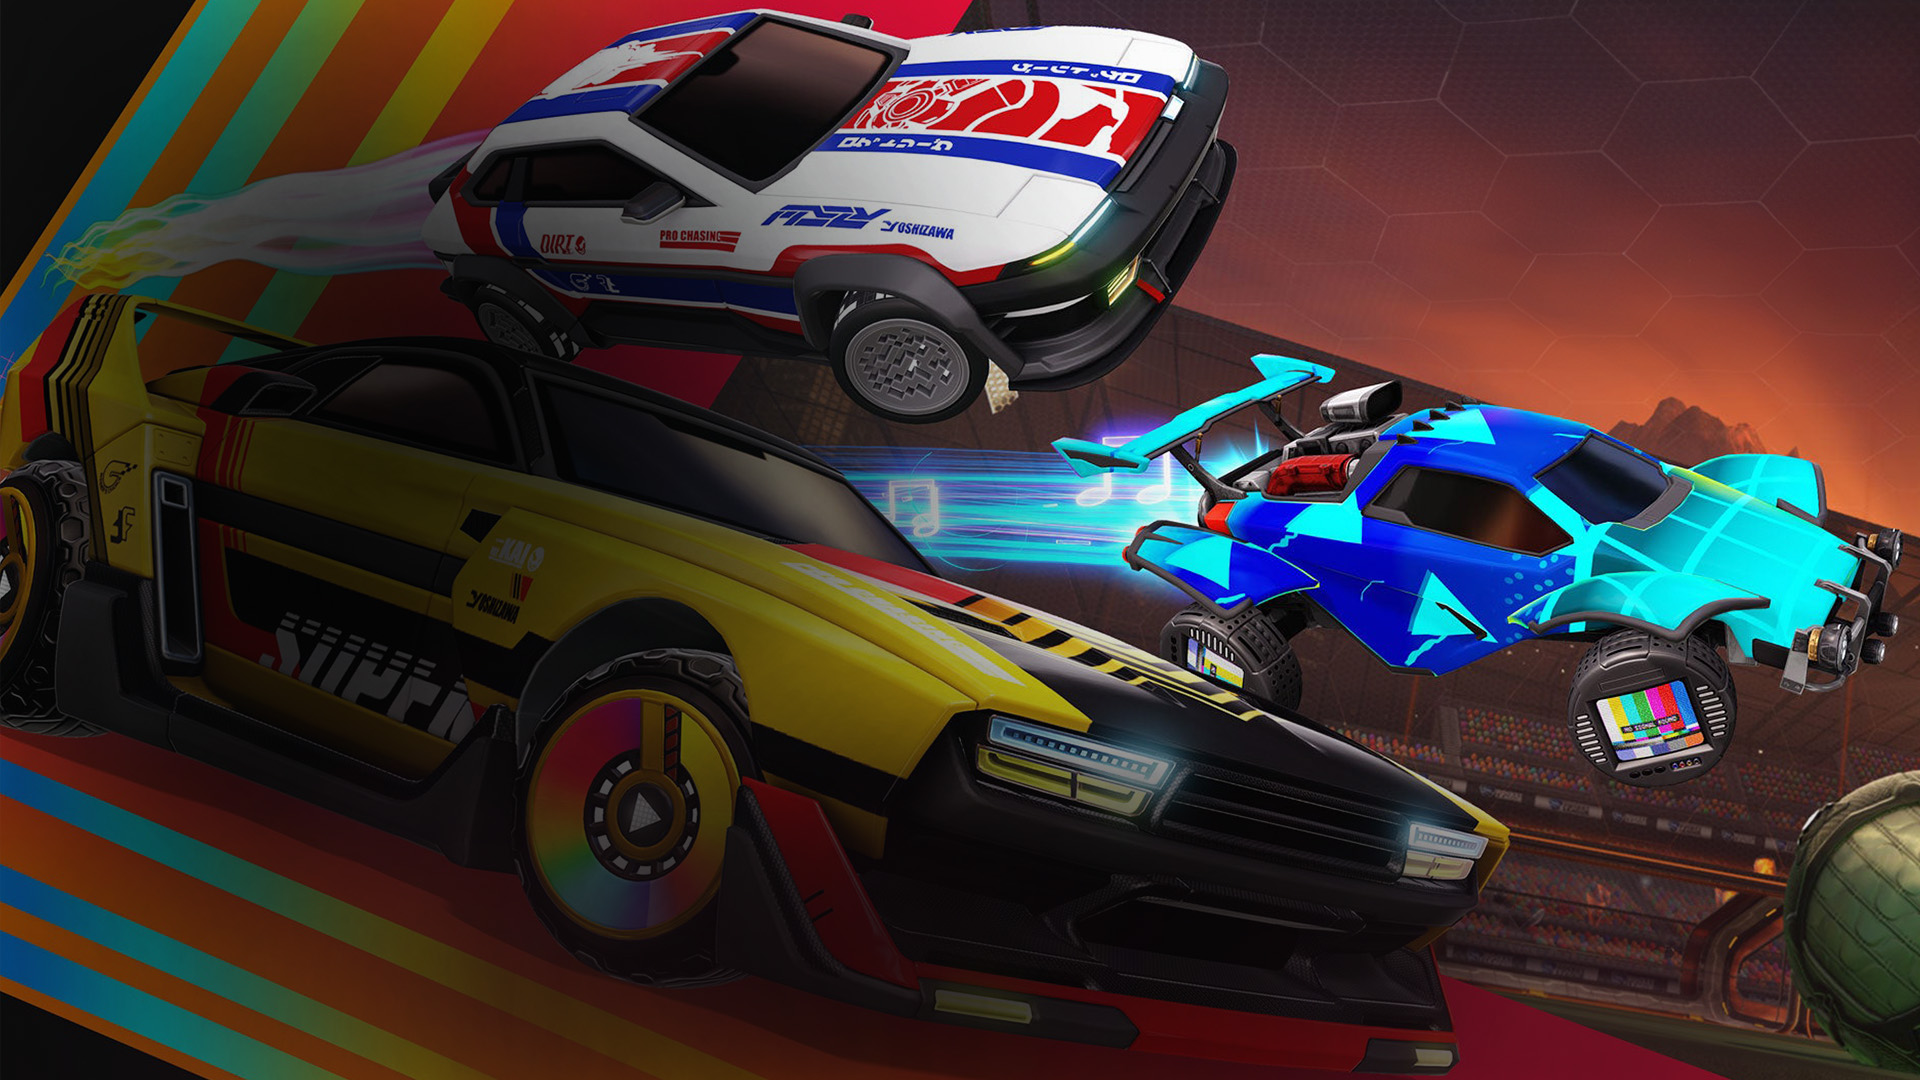 Multiple rocket-cars, with different unlockable vehicle skins, blast across the field after the ball. 